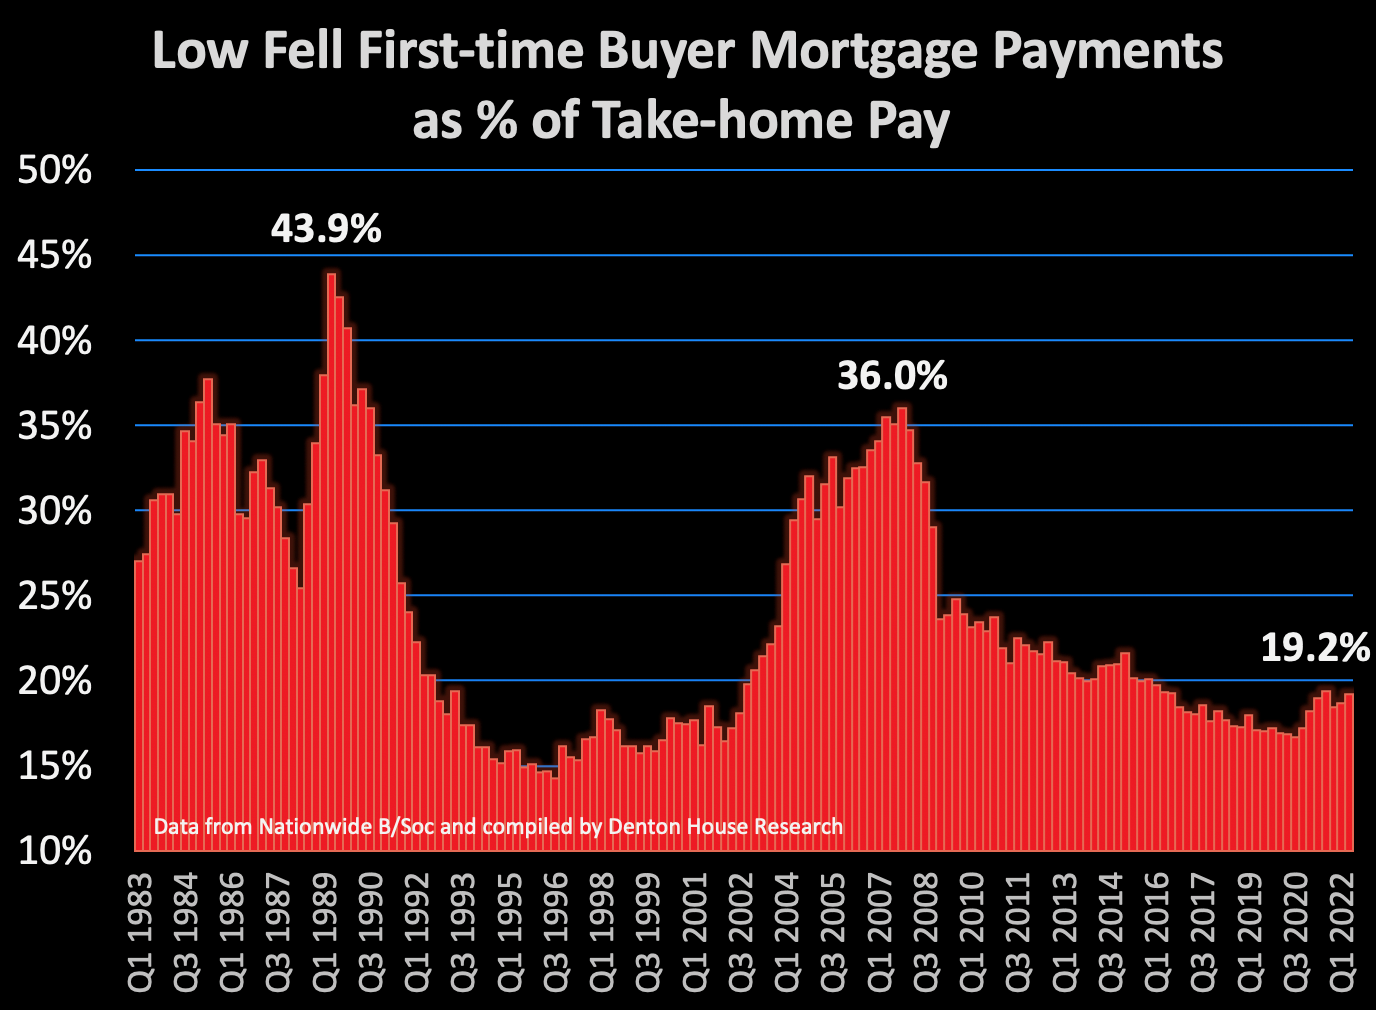 Low Fell First-time Buyer Mortgage Payments as % of Take-home Pay